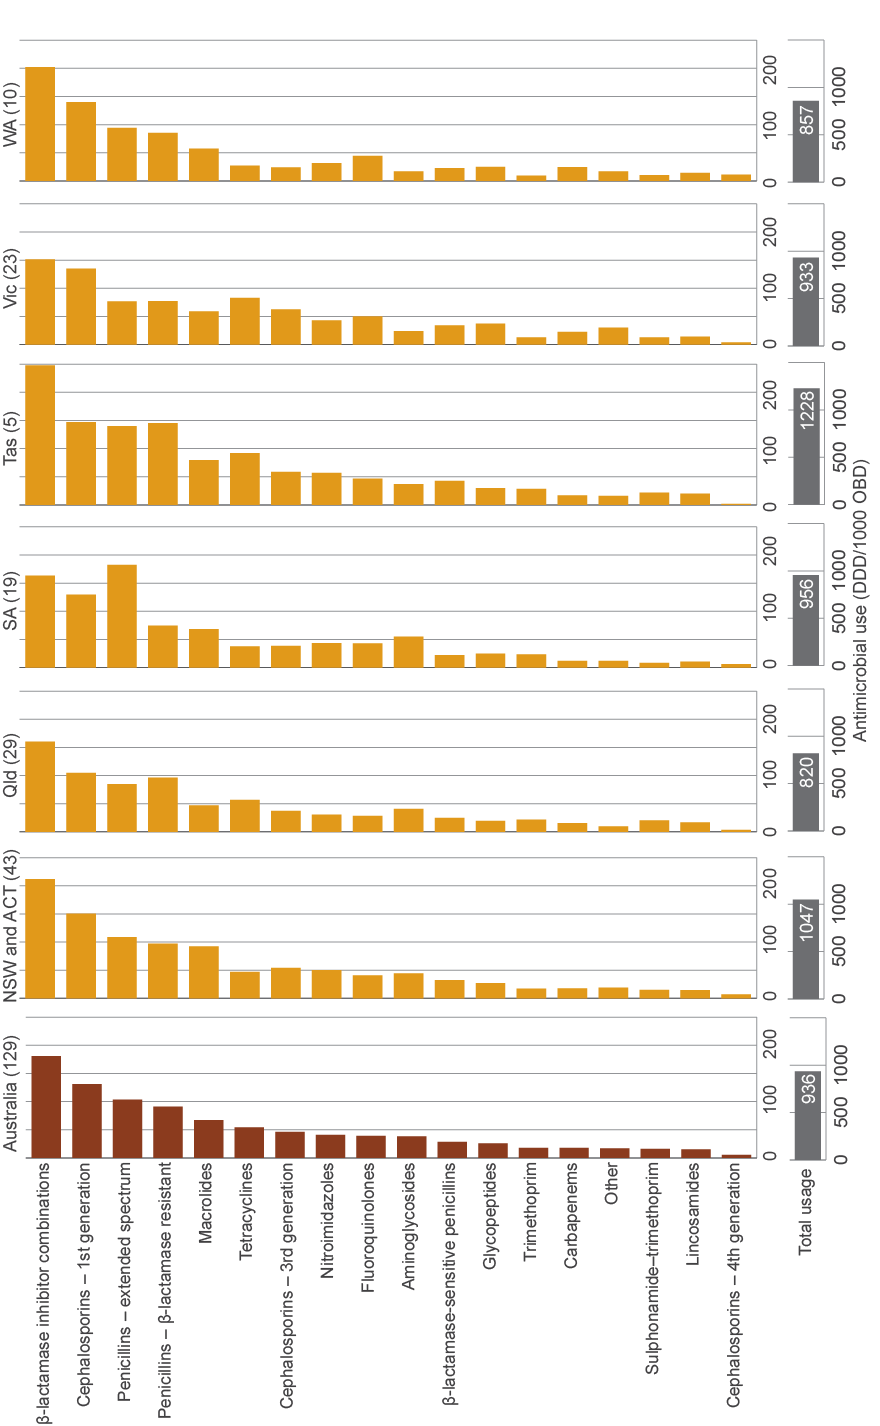 bar chart showing total antimicrobial usage rates and breakdown by antimicrobial class in australia, and in each state and territory contributing to nausp in 2014. overall, 129 hospitals contributed, giving a total antimicrobial usage rate of 936 ddd/1000 obd; beta-lactamase inhibitor combinations were the highest used class at around 175 ddd/1000 obd. number of contributing hospitals, total usage and usage by class differed between states and territories.